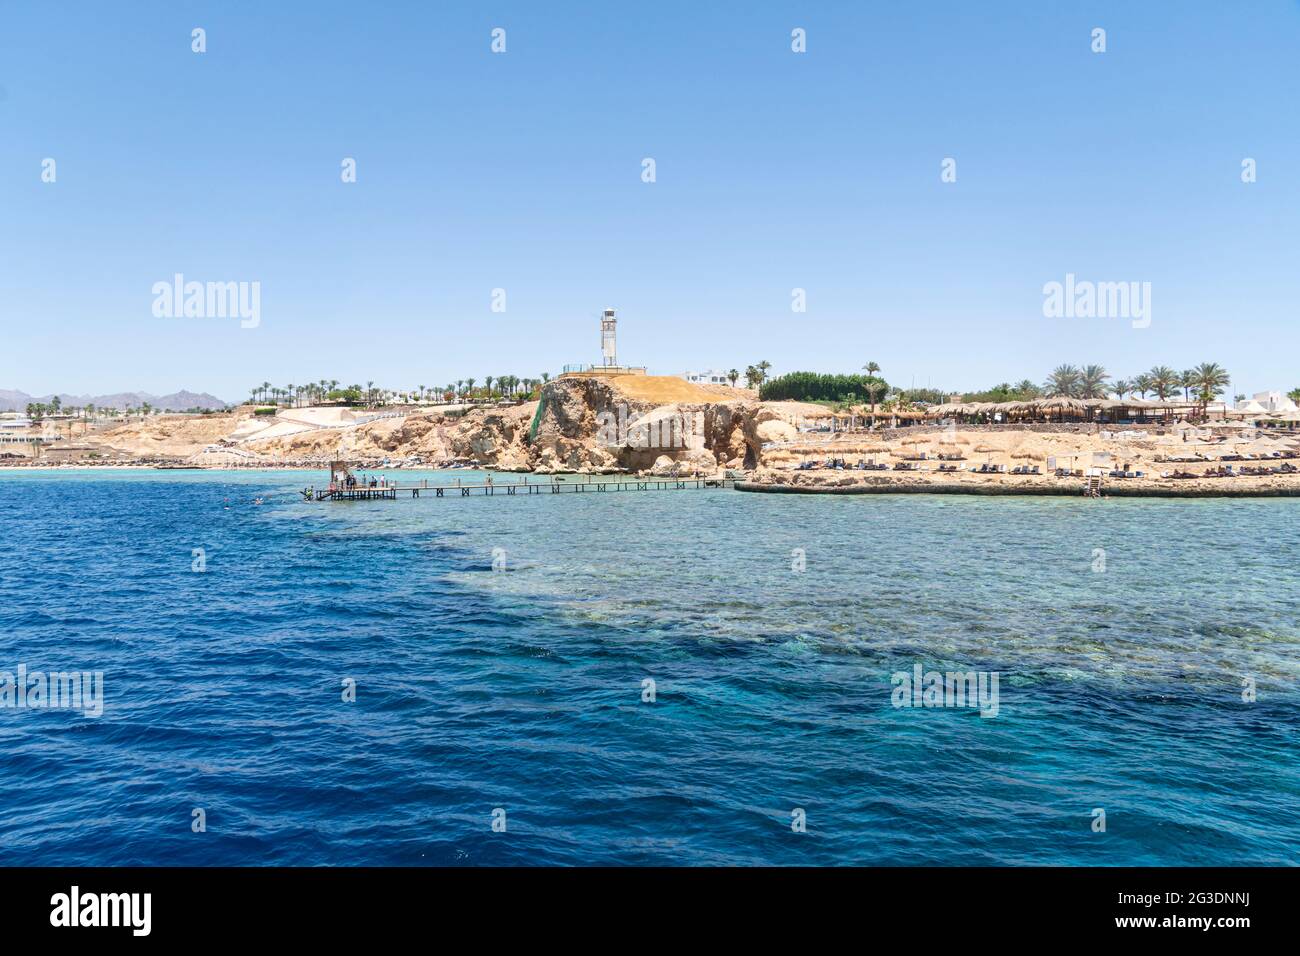 Beautiful rocky coast in the resort town of Sharm el Sheikh, Egypt. View from the sea. Egyptian landscape in Sinai. Stock Photo